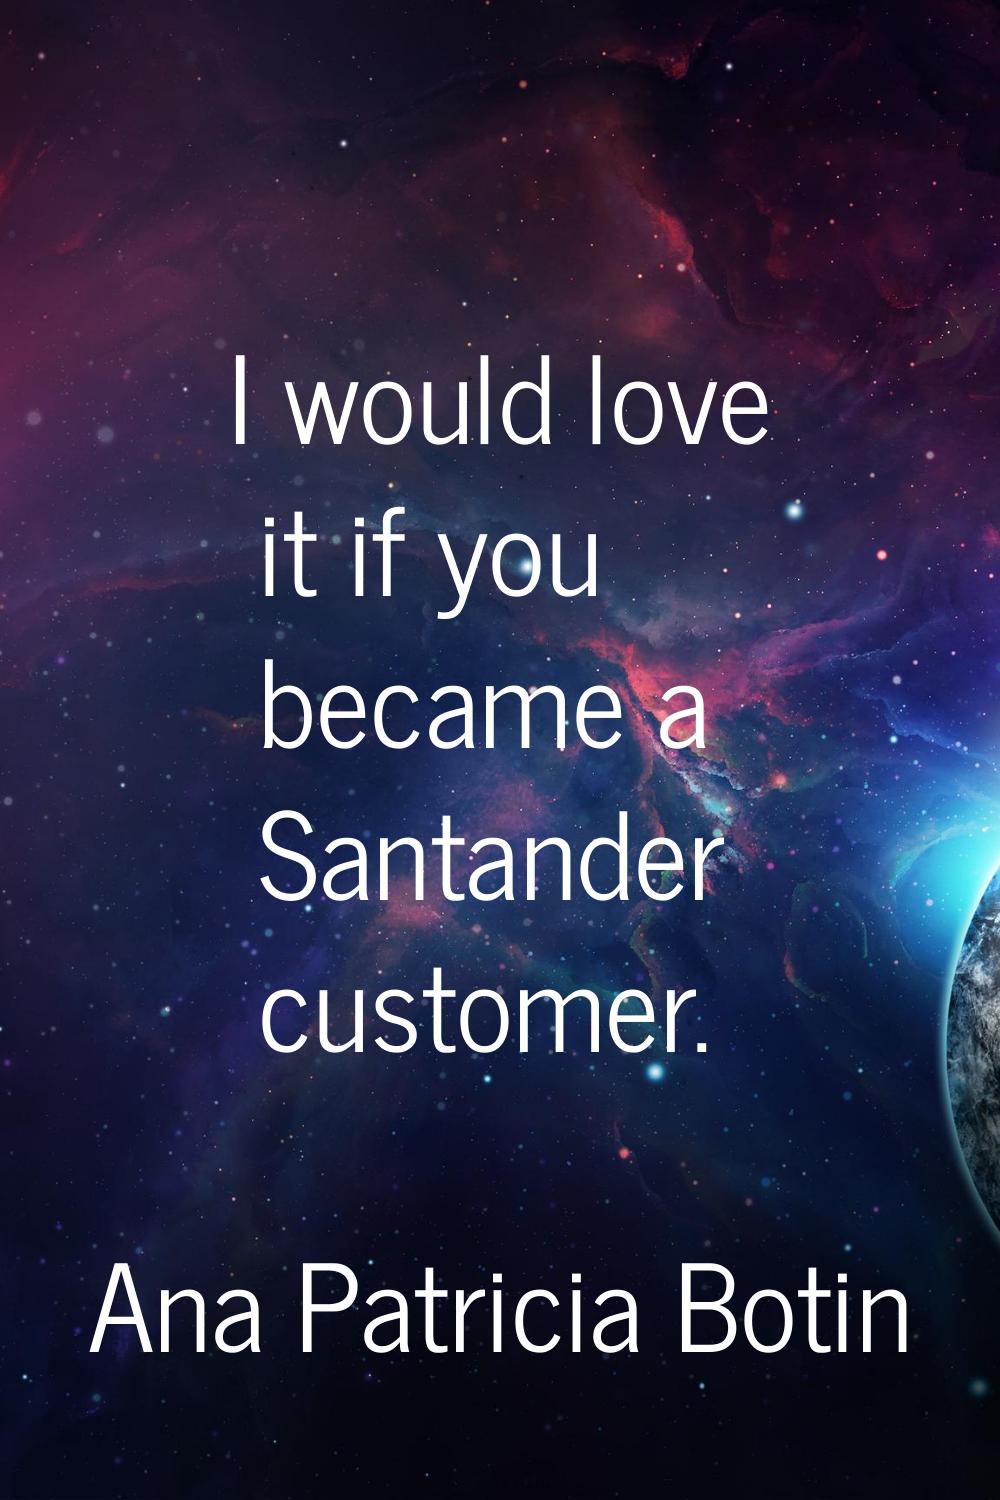 I would love it if you became a Santander customer.